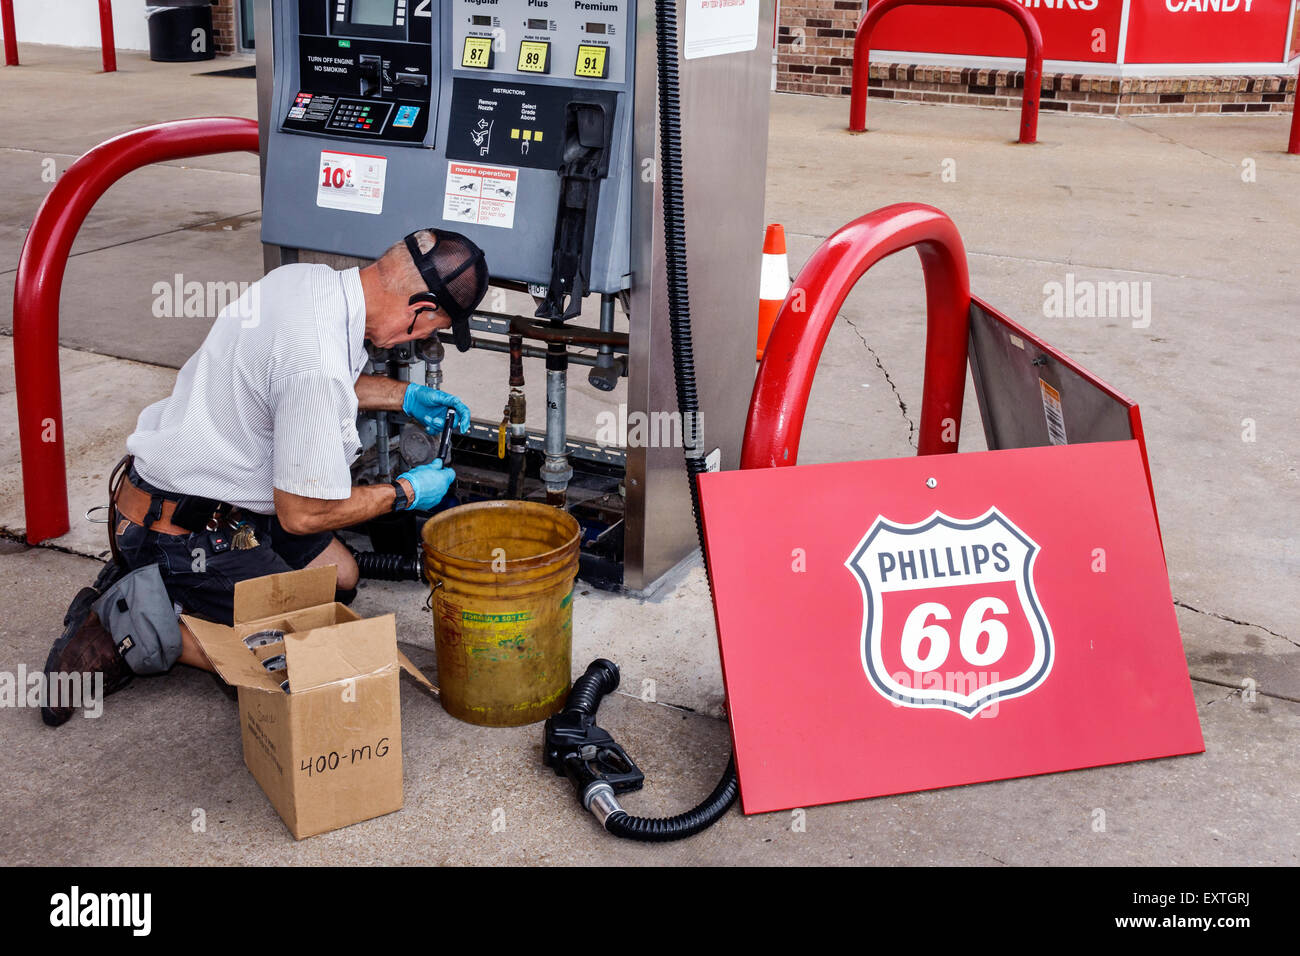 Phillips 66 Stock Photos & Phillips 66 Stock Images - Alamy